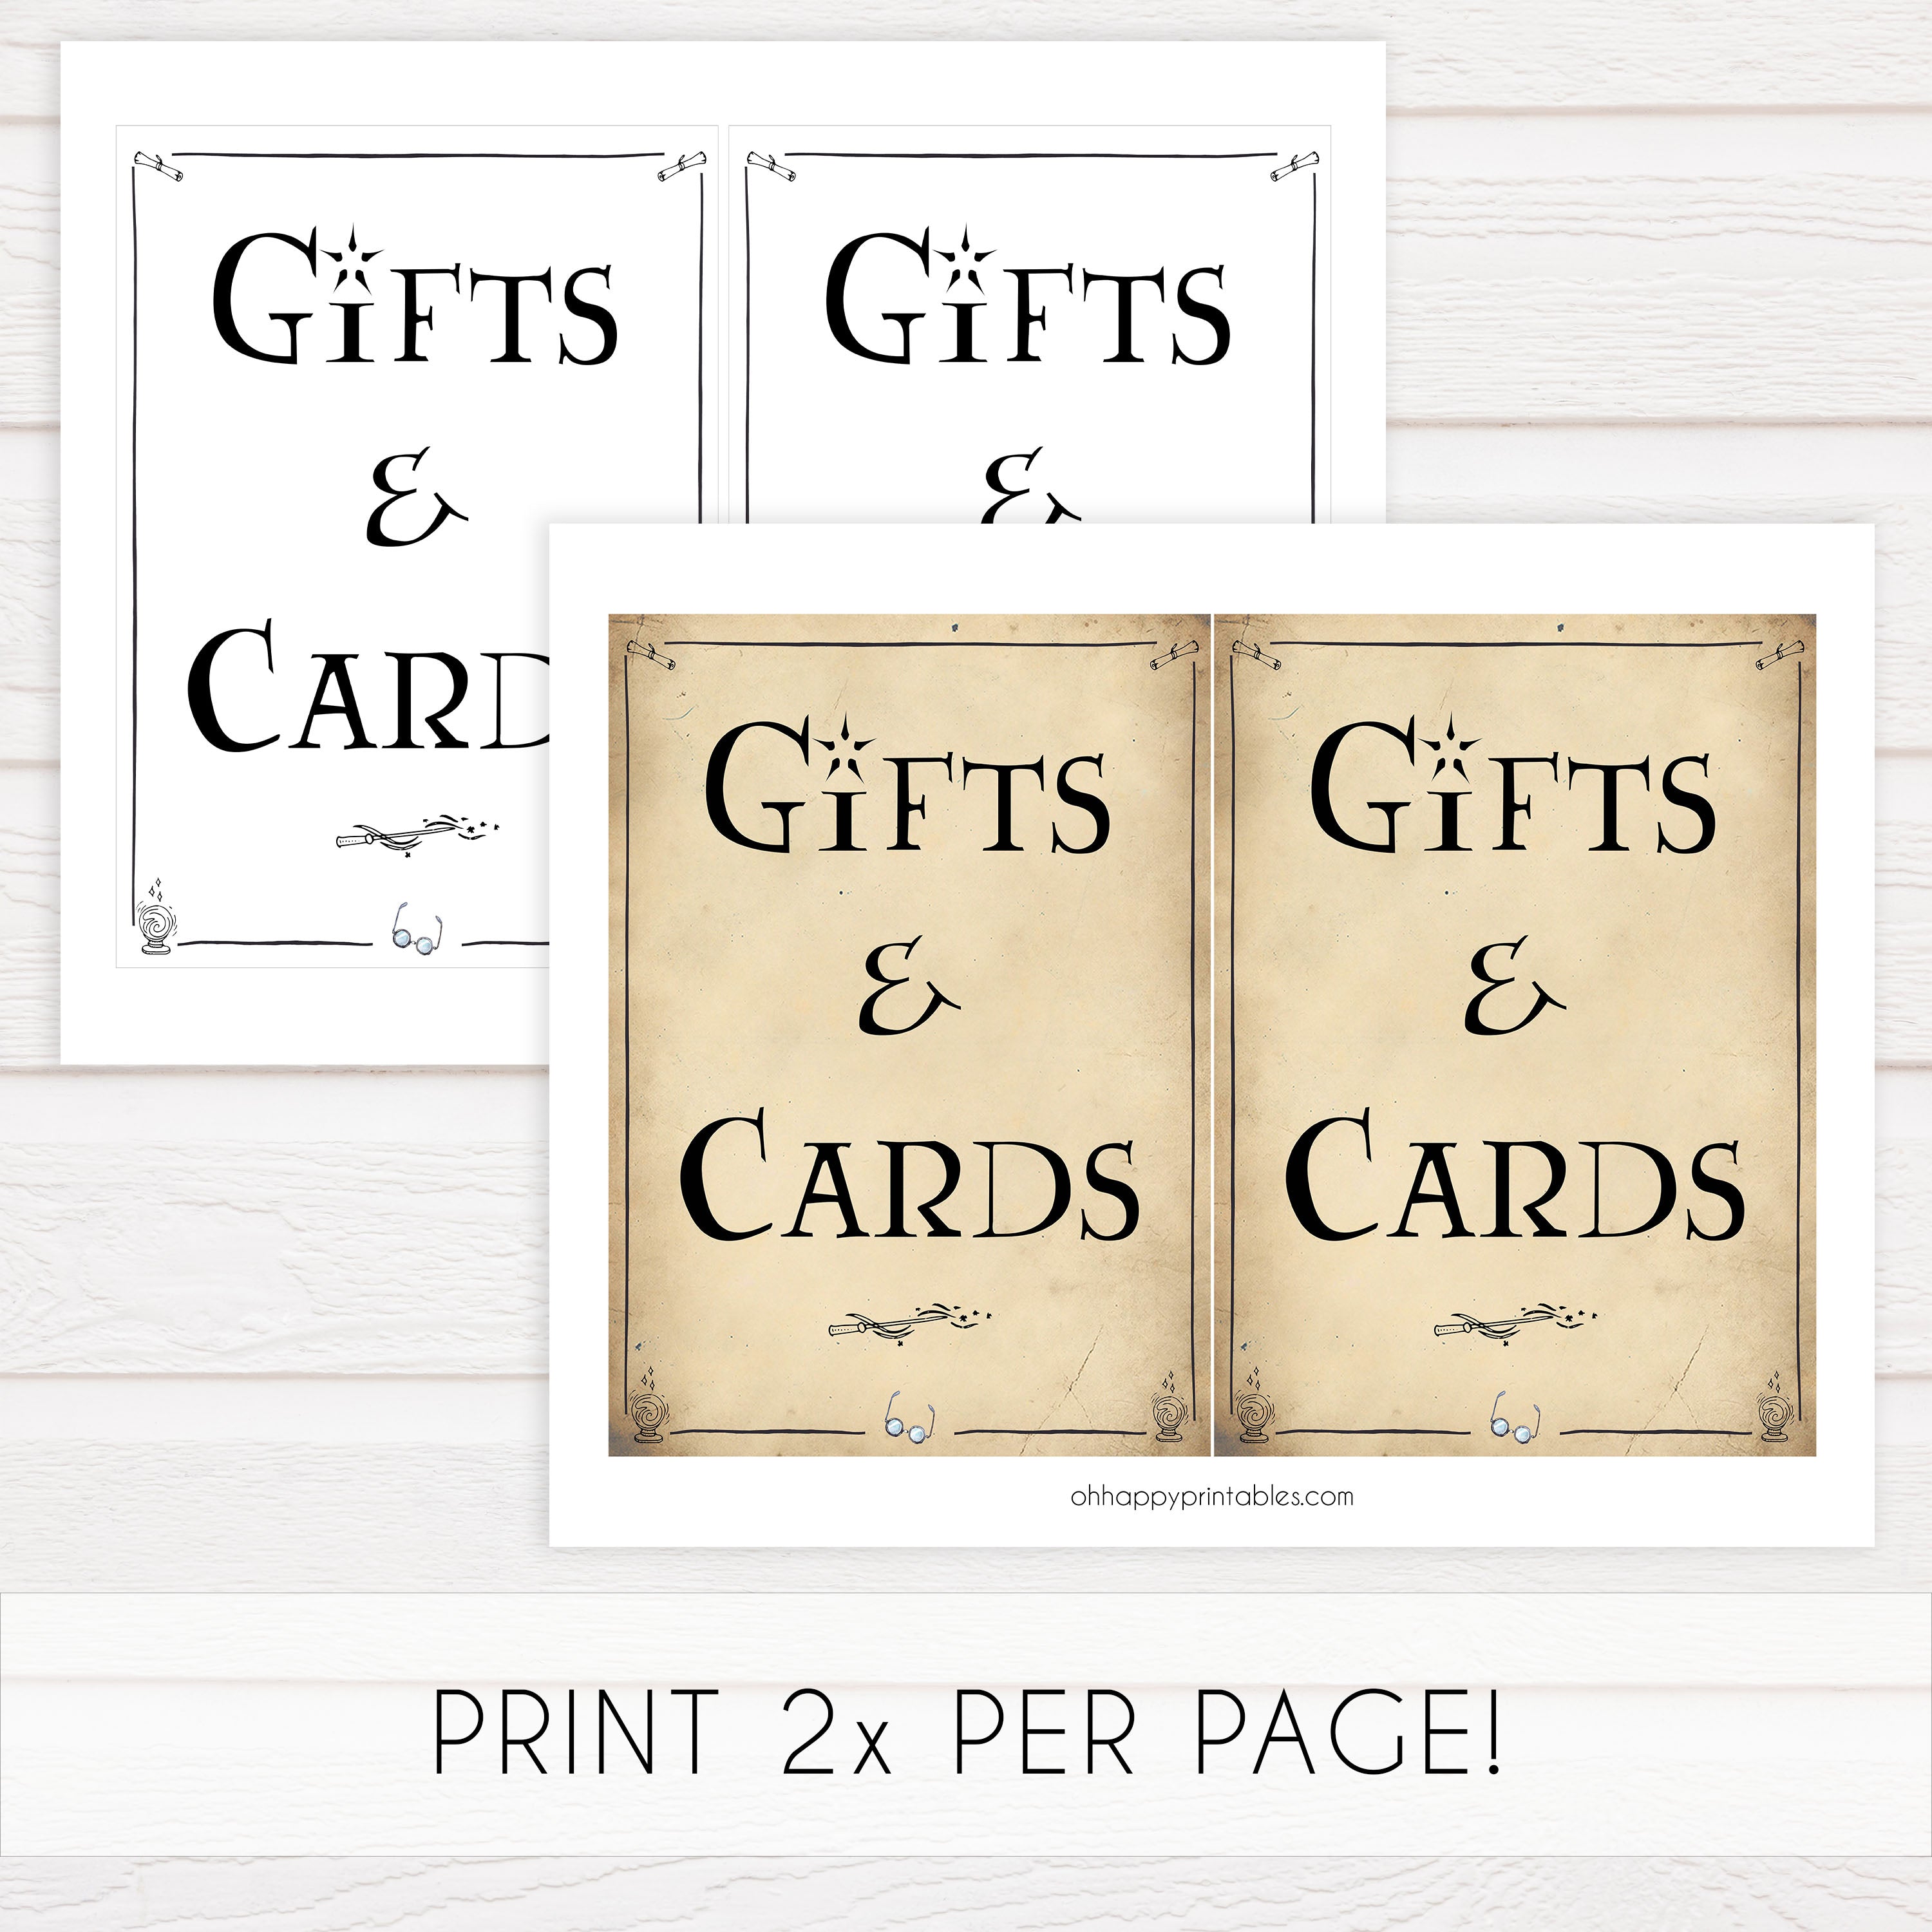 Gifts and Cards baby sign, Wizard baby shower signs, printable baby shower decor, Harry Potter baby decor, Harry Potter baby shower ideas, fun baby decor, fun baby signs